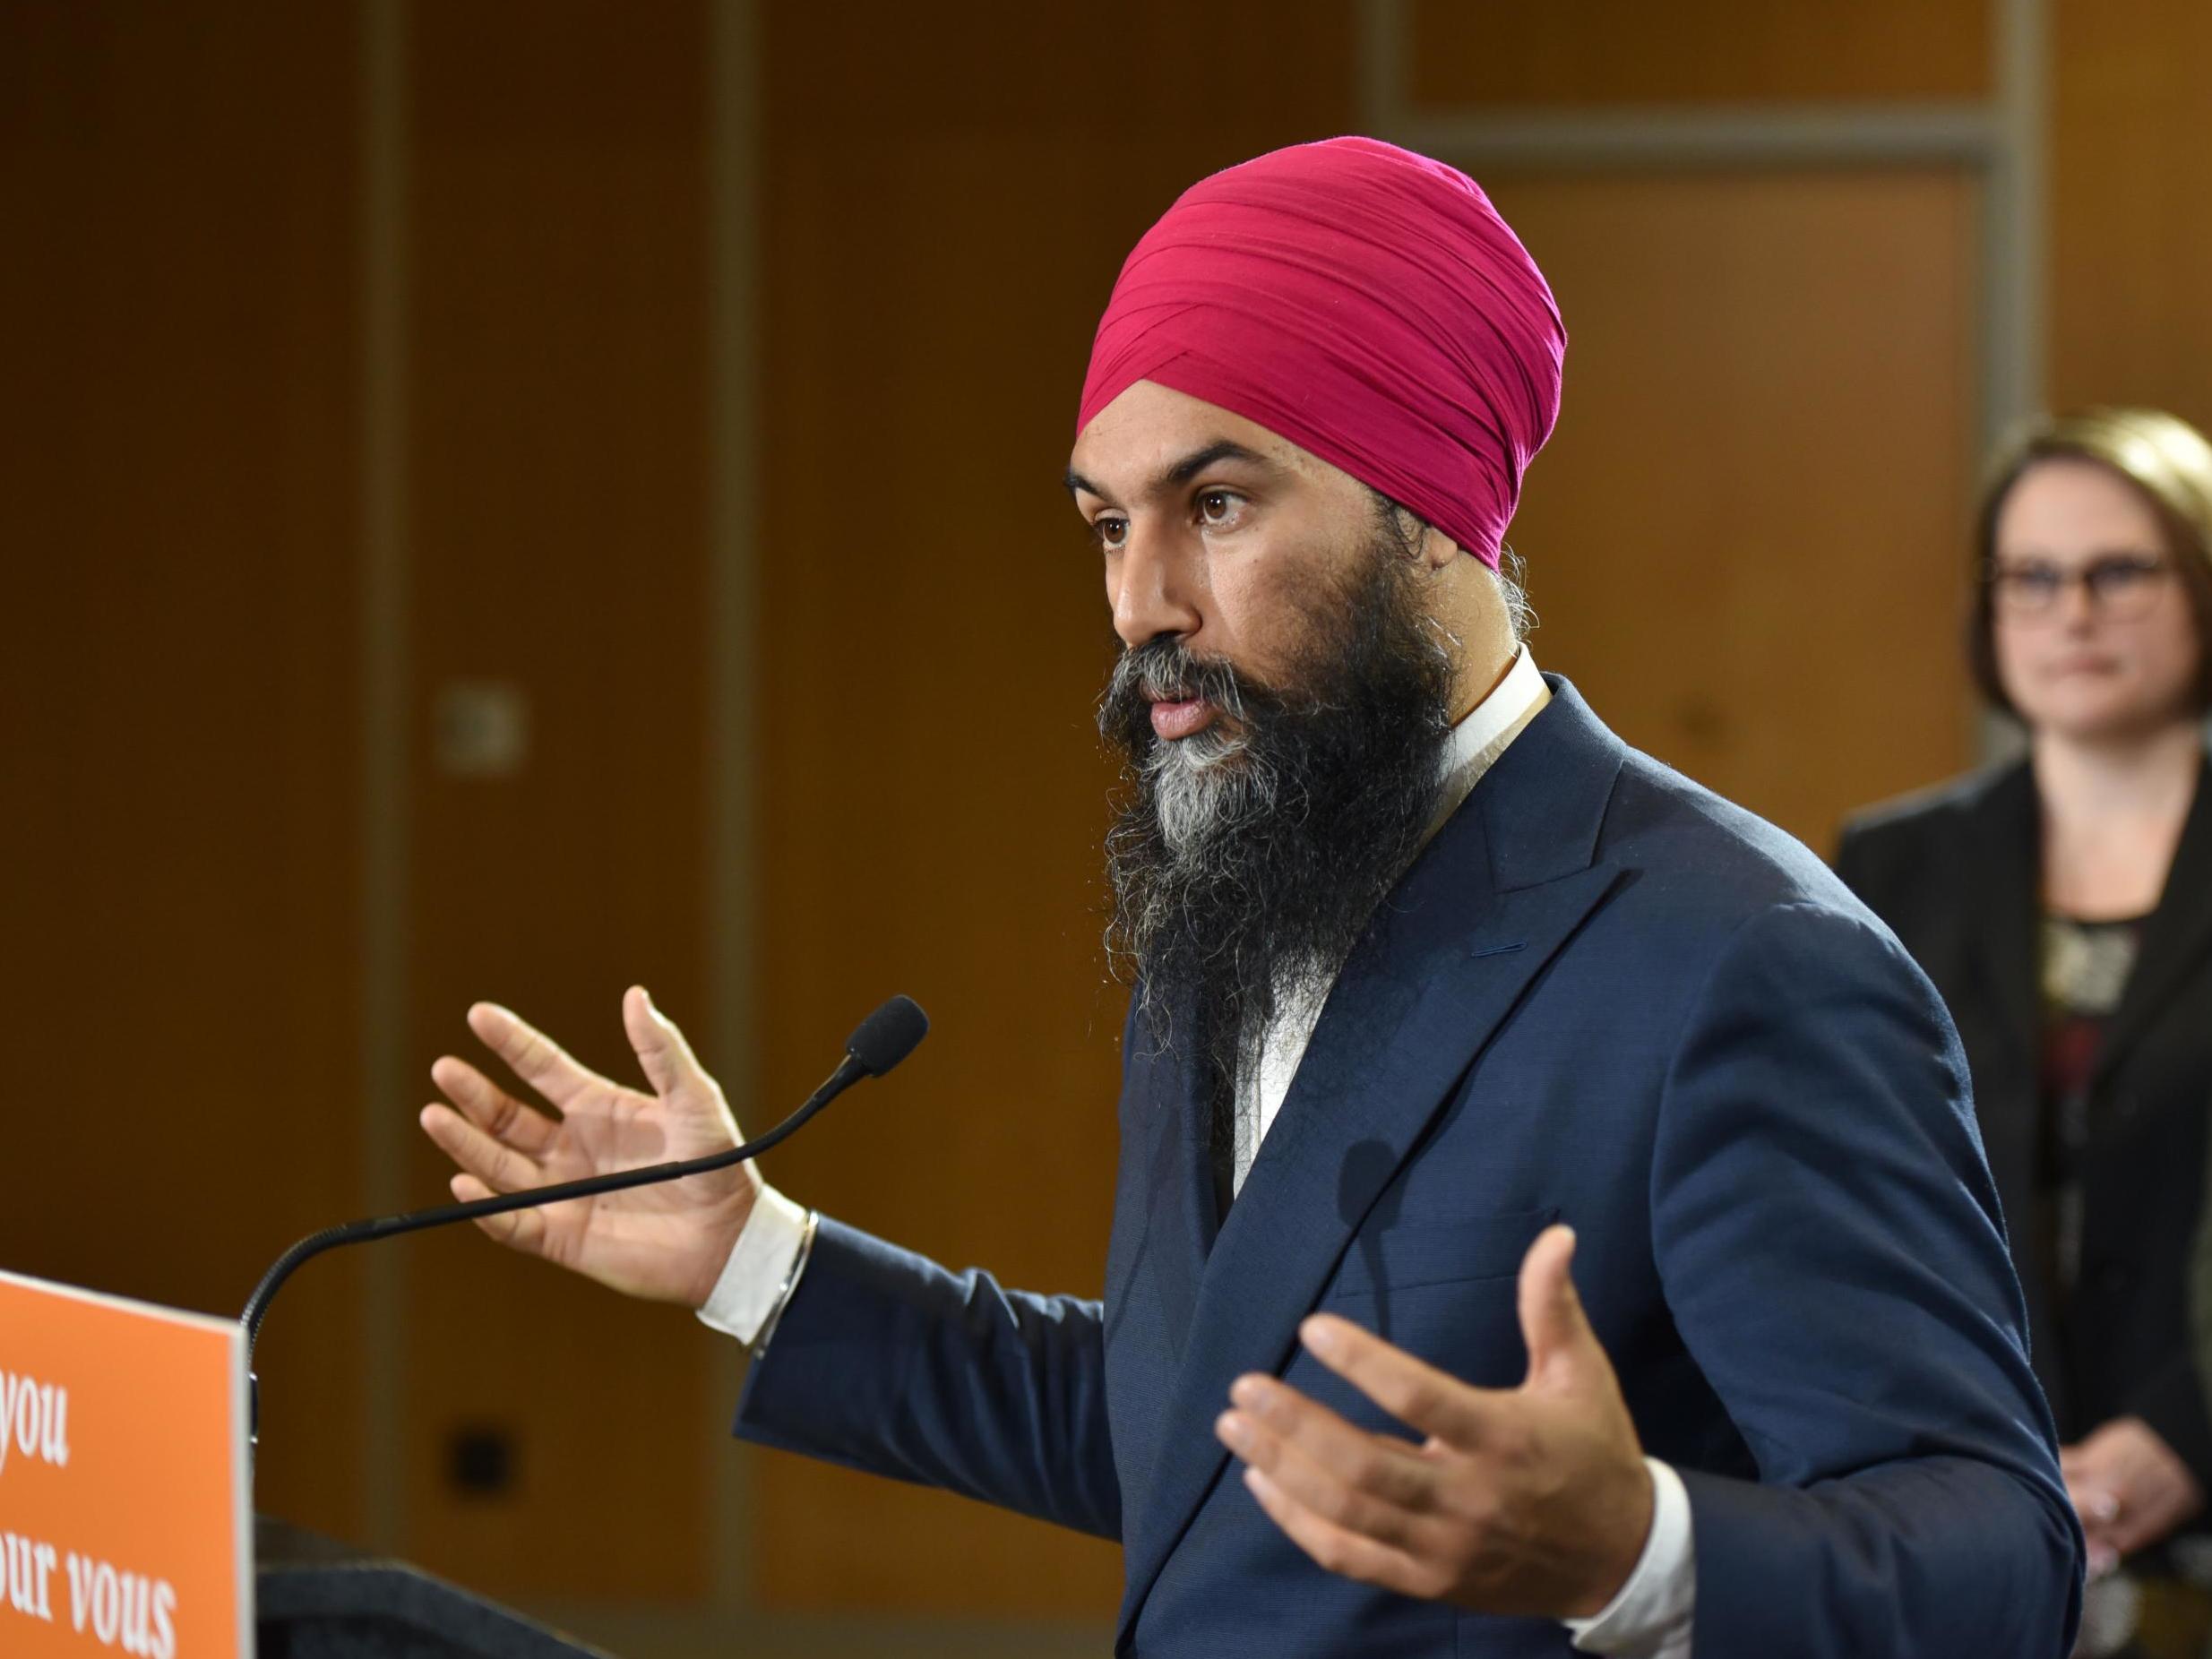 Jagmeet Singh, the leader of the NDP, speaks in Vancouver during a campaign stop in 2019.